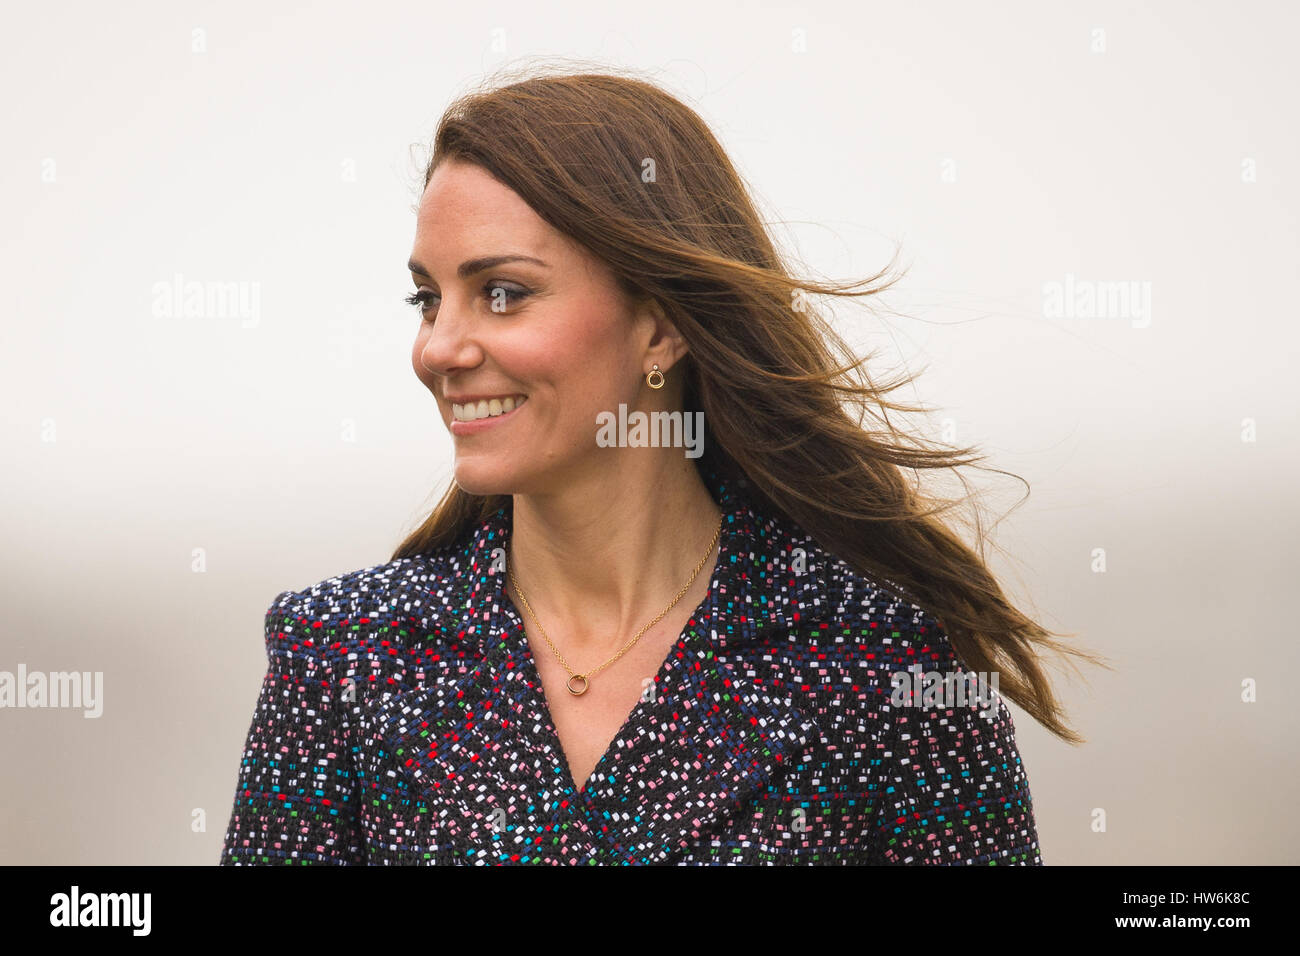 The Duchess of Cambridge at the Trocadero, Paris, during a Les Voisins in Action event highlighting the strong ties between the young people of France and the UK, during their official visit to Paris, France. Stock Photo